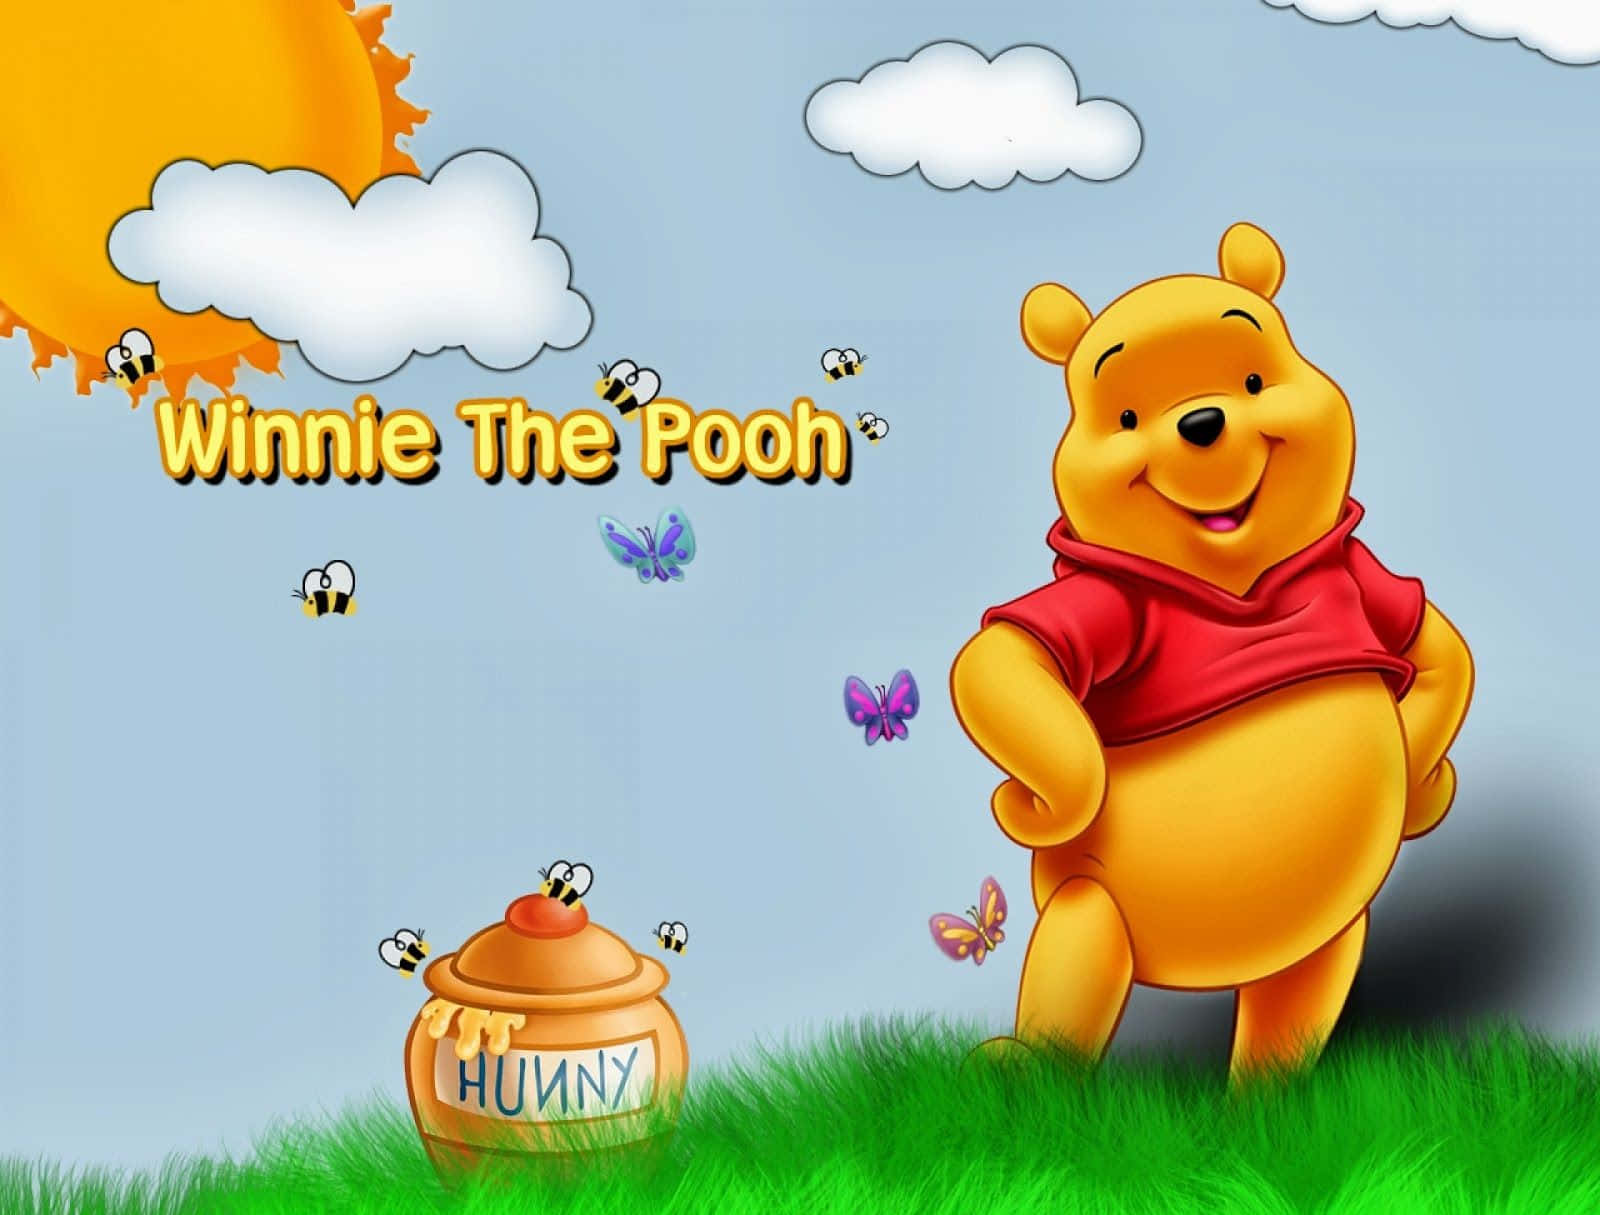 Your little one will love working on their school projects while snuggled up with Winnie the Pooh. Wallpaper